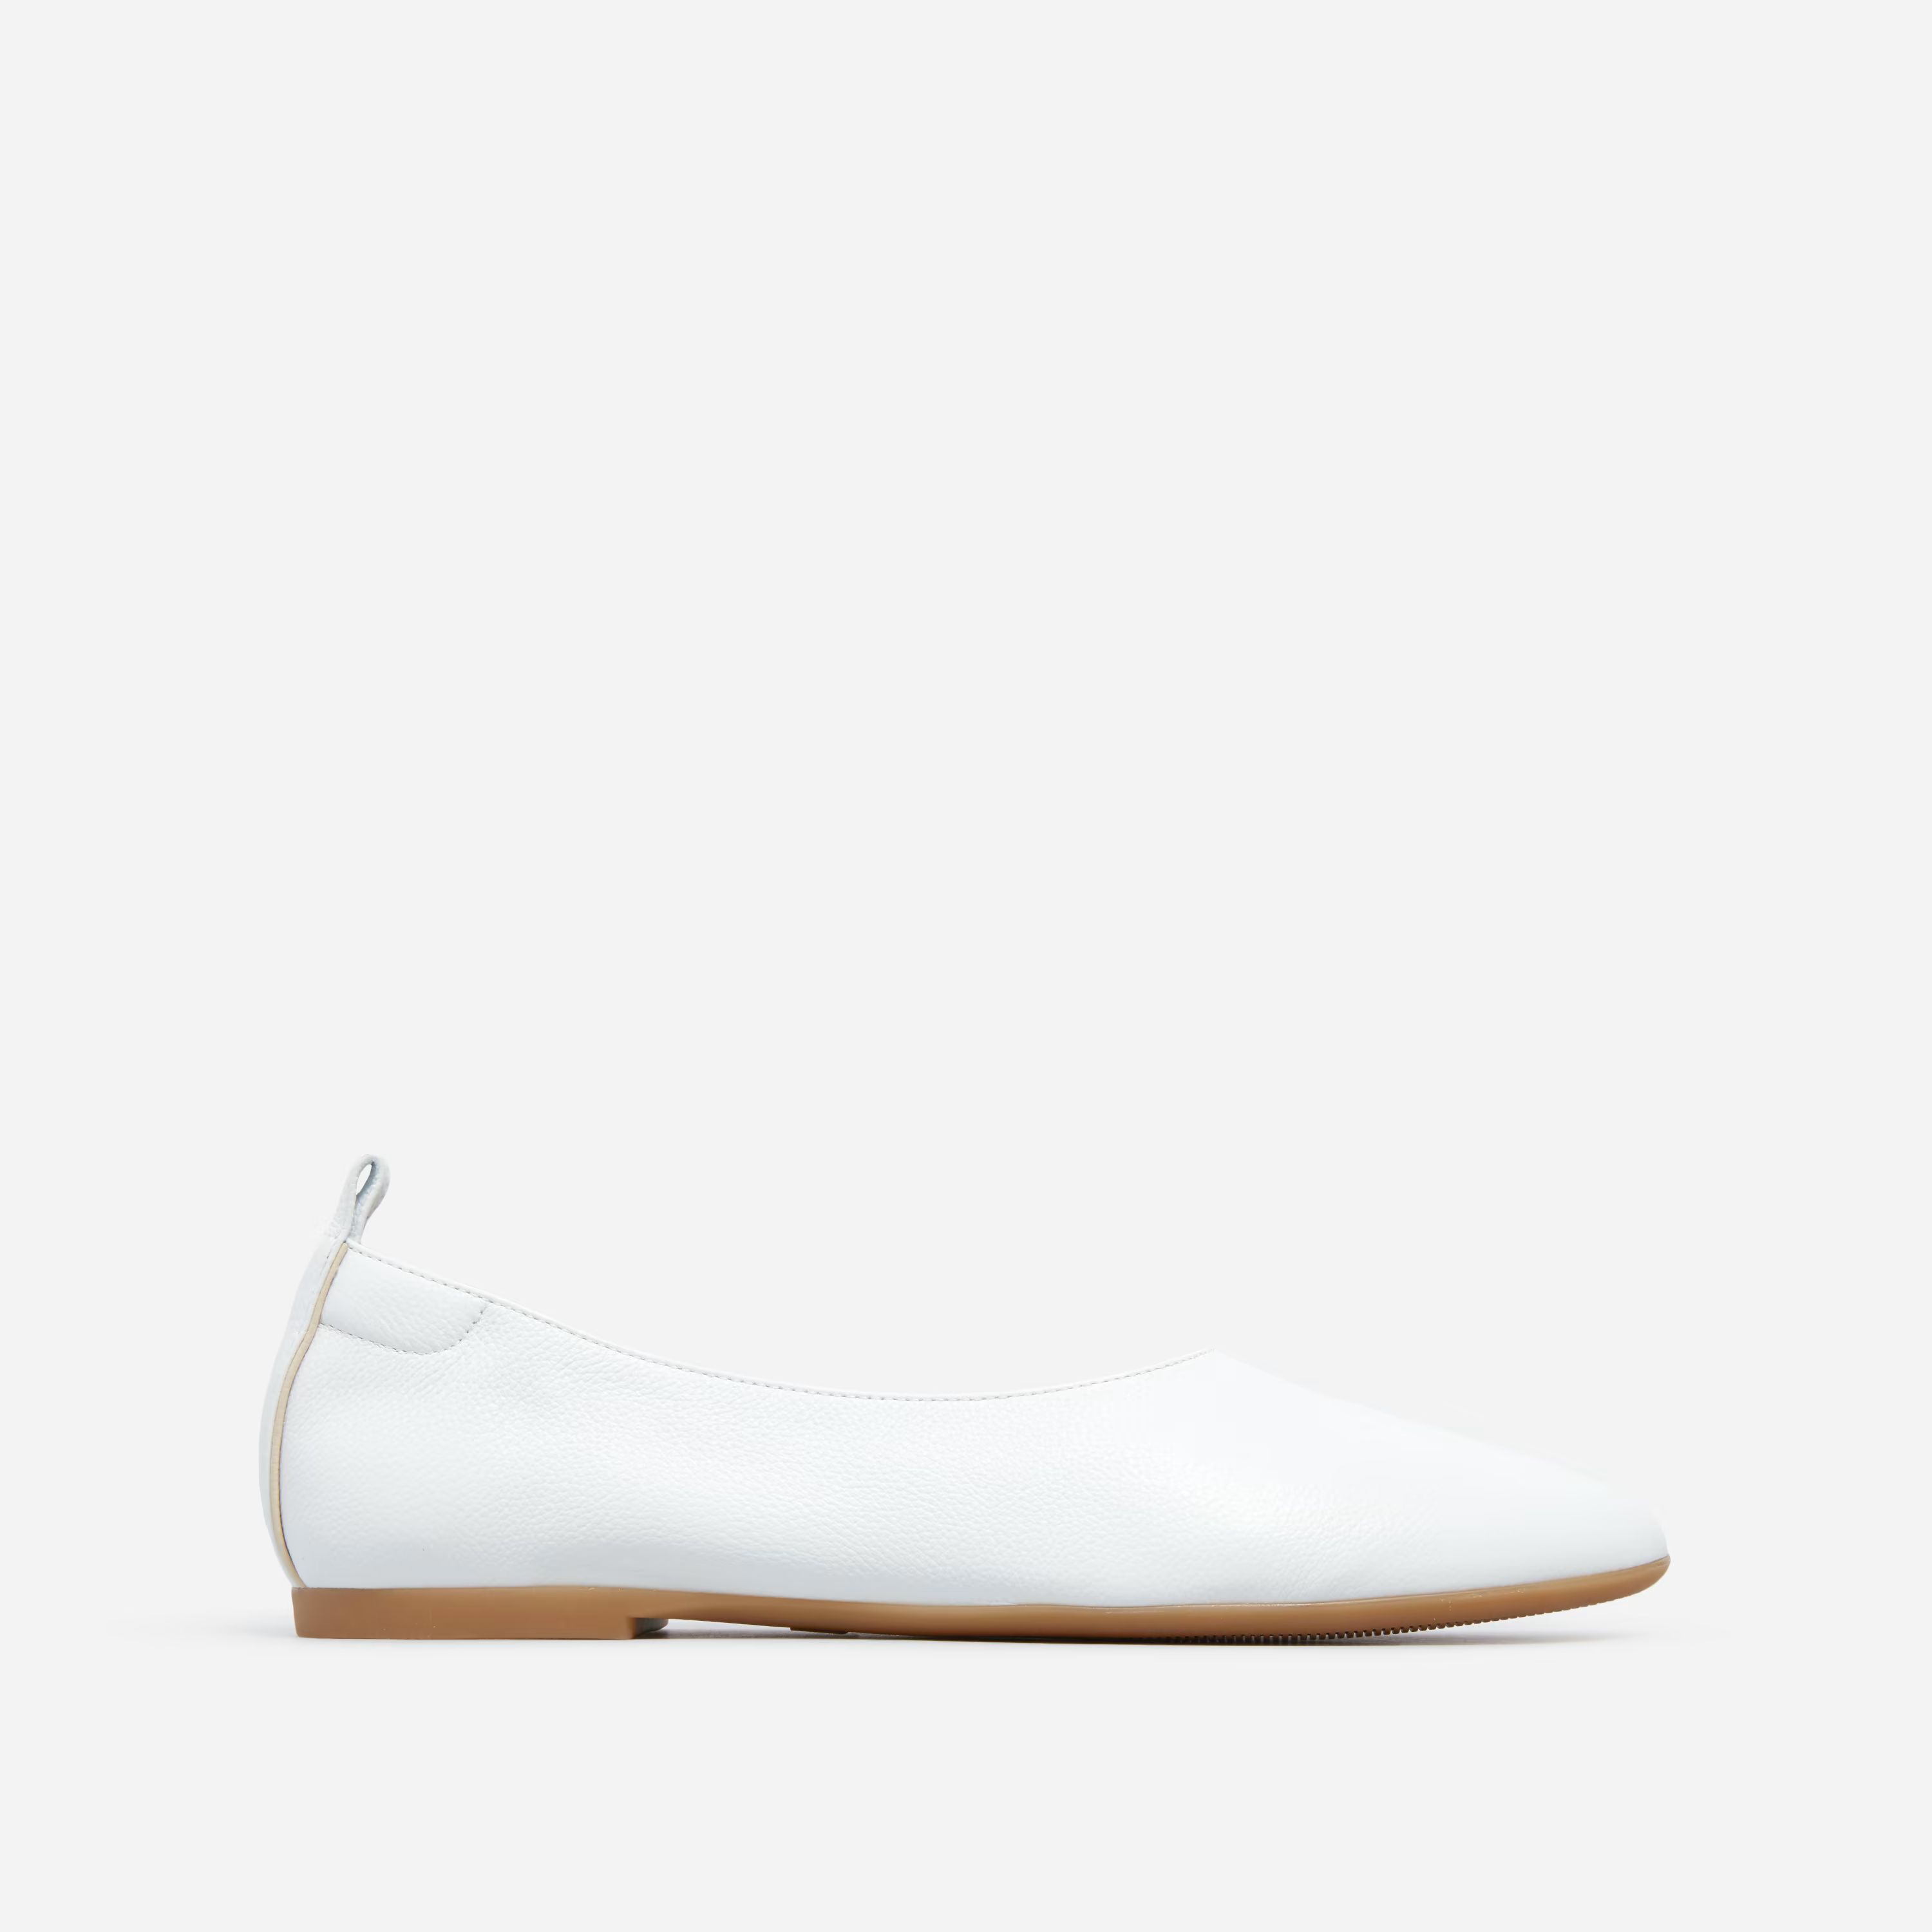 DetailsRuns true to size. Take your true size for a snug, glove-like fit. These will give with ti... | Everlane